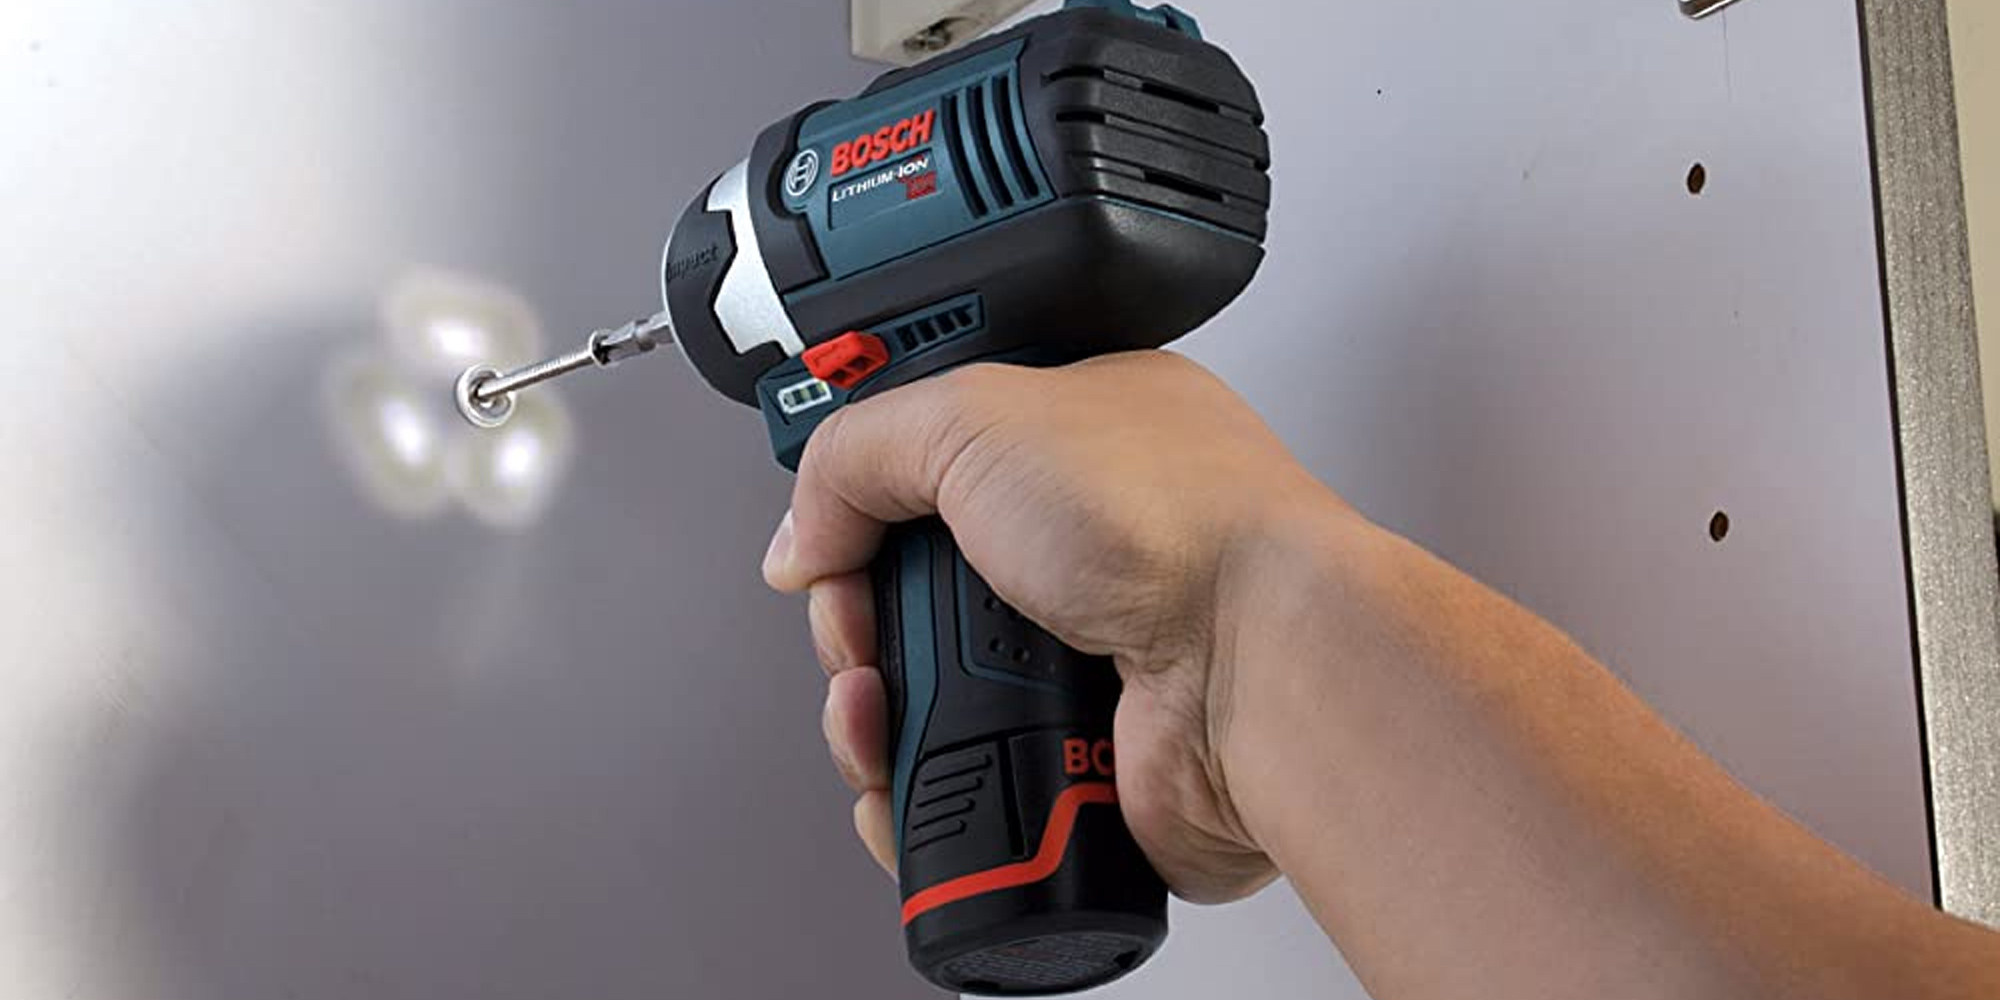 Bosch's 2-pack of drill/driver and impact near all-time lows from